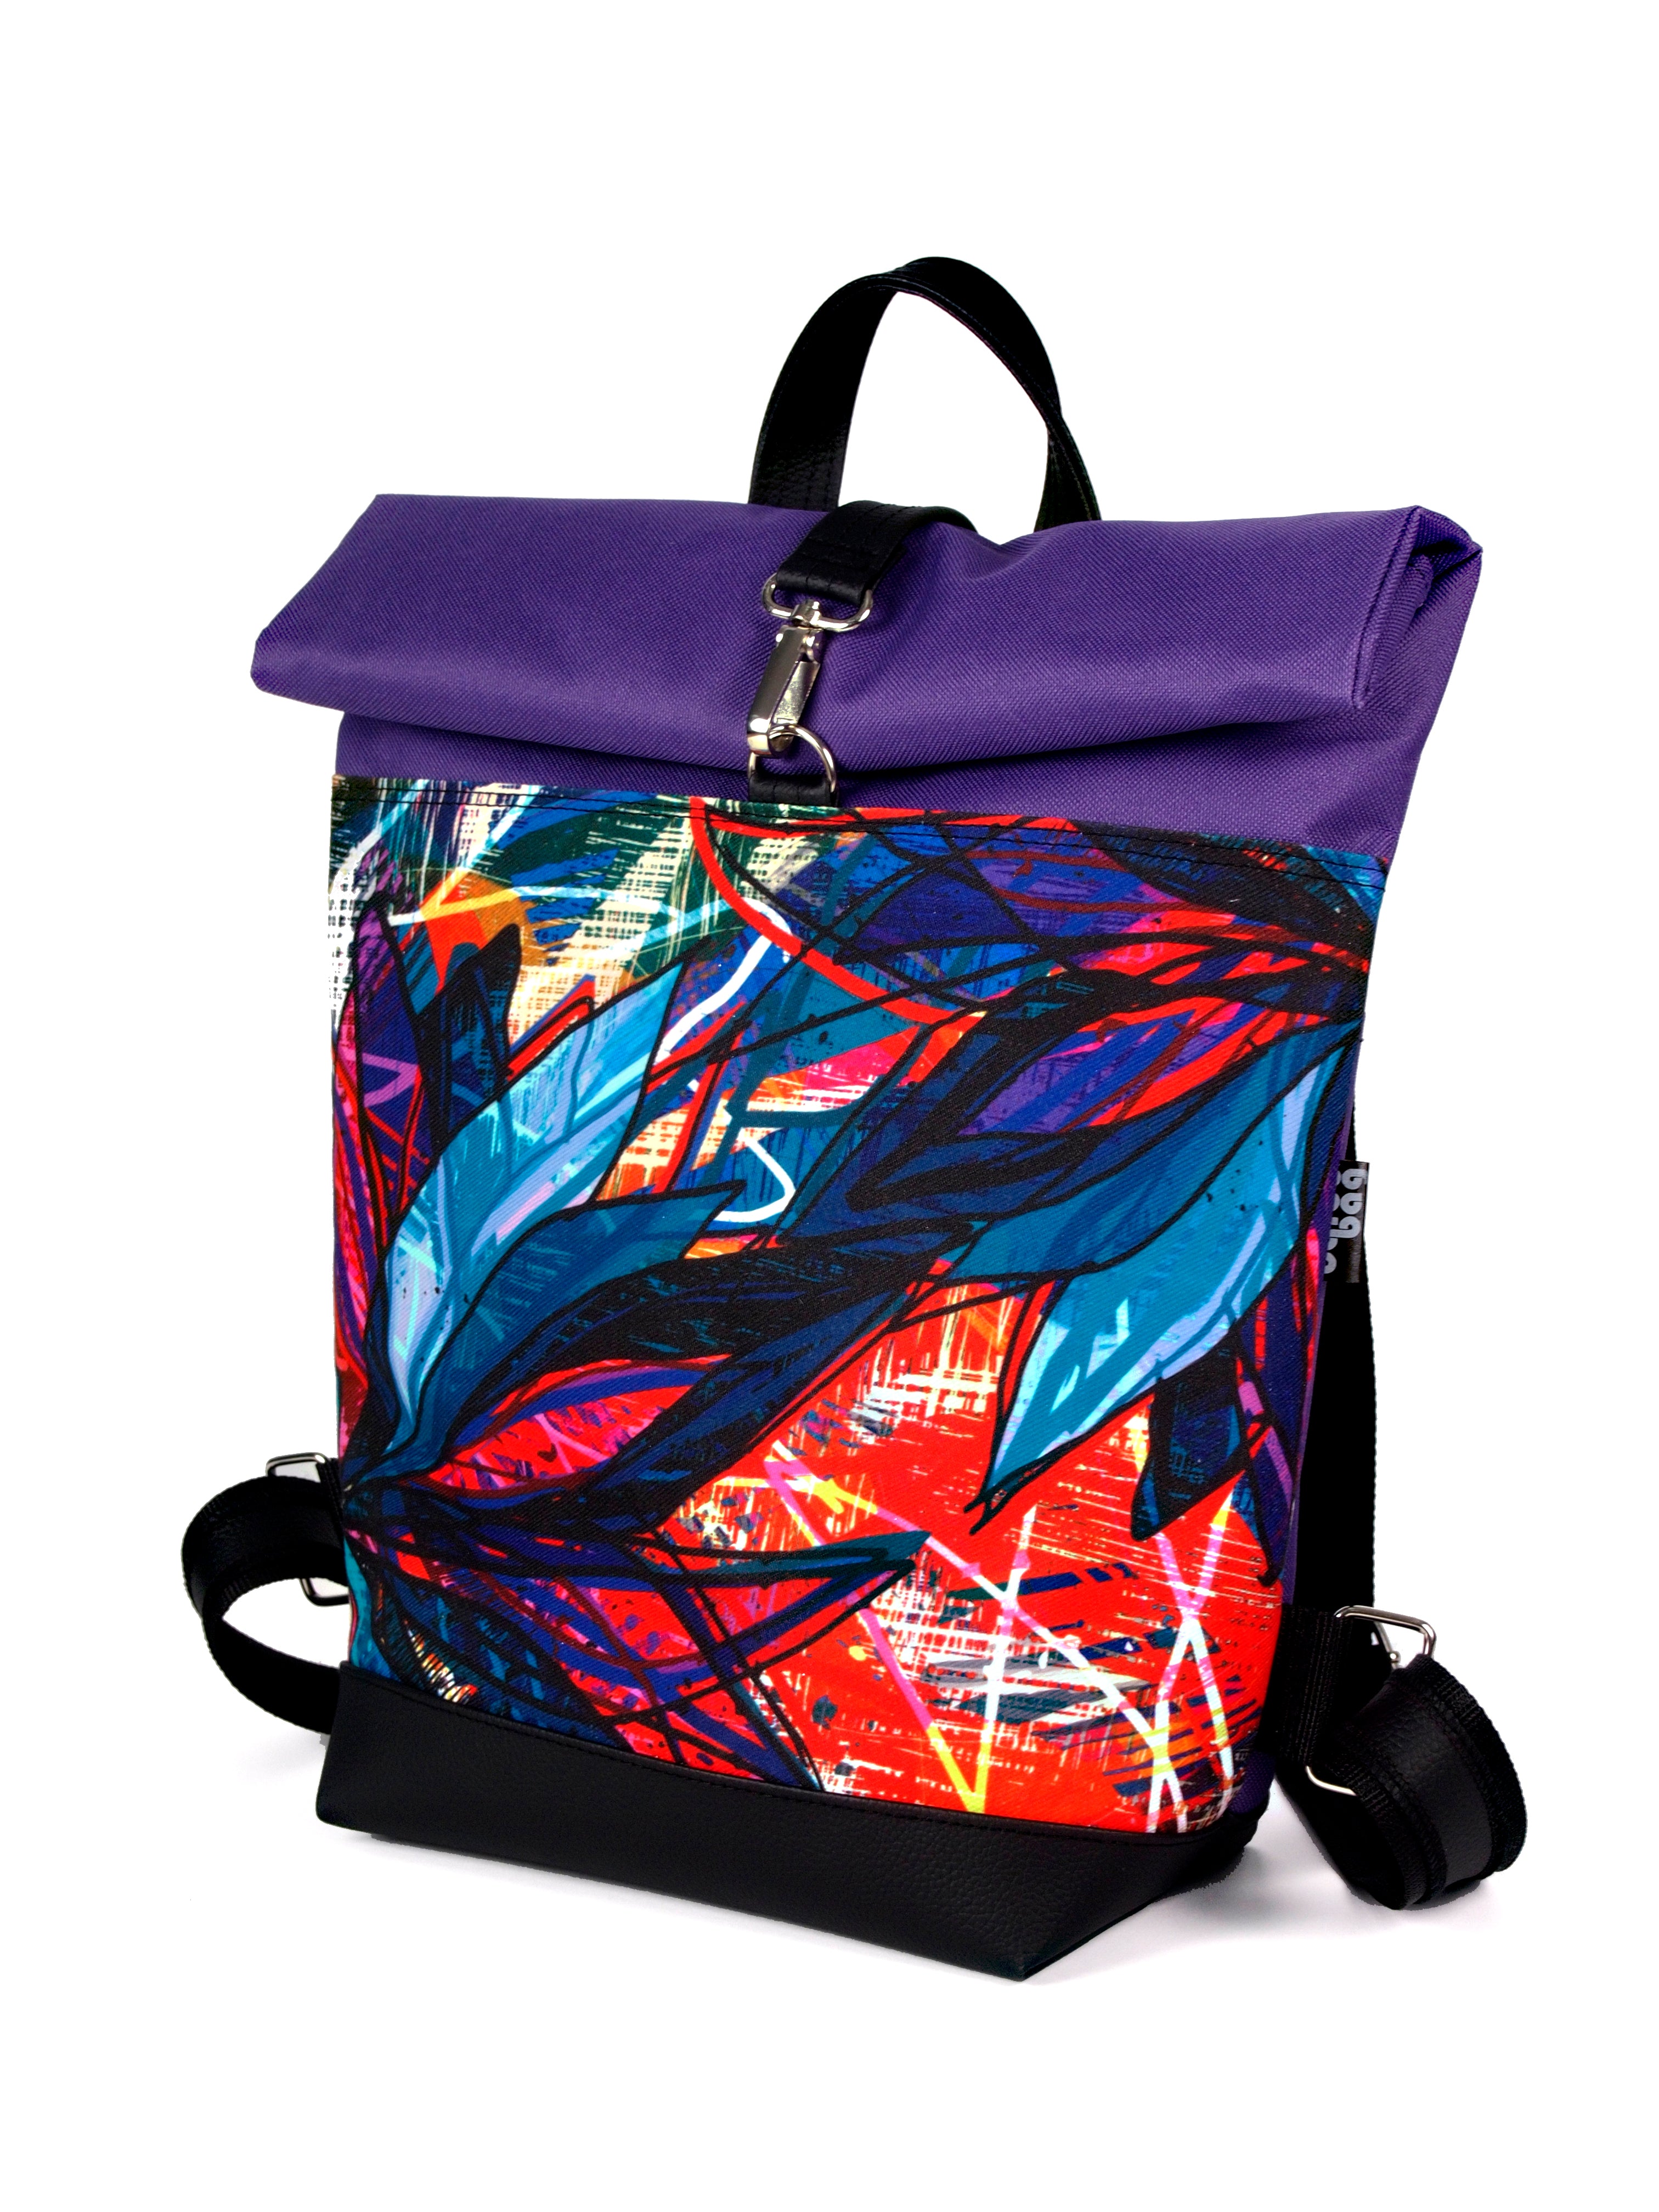 Bardo roll backpack - Blue Water Lily - Premium Bardo backpack from BARDO ART WORKS - Just lvabstract, art, backpack, black, Blue Water Lily, dark blue, gift, handemade, purple, tablet, urban style, vegan leather, woman85.00! Shop now at BARDO ART WORKS